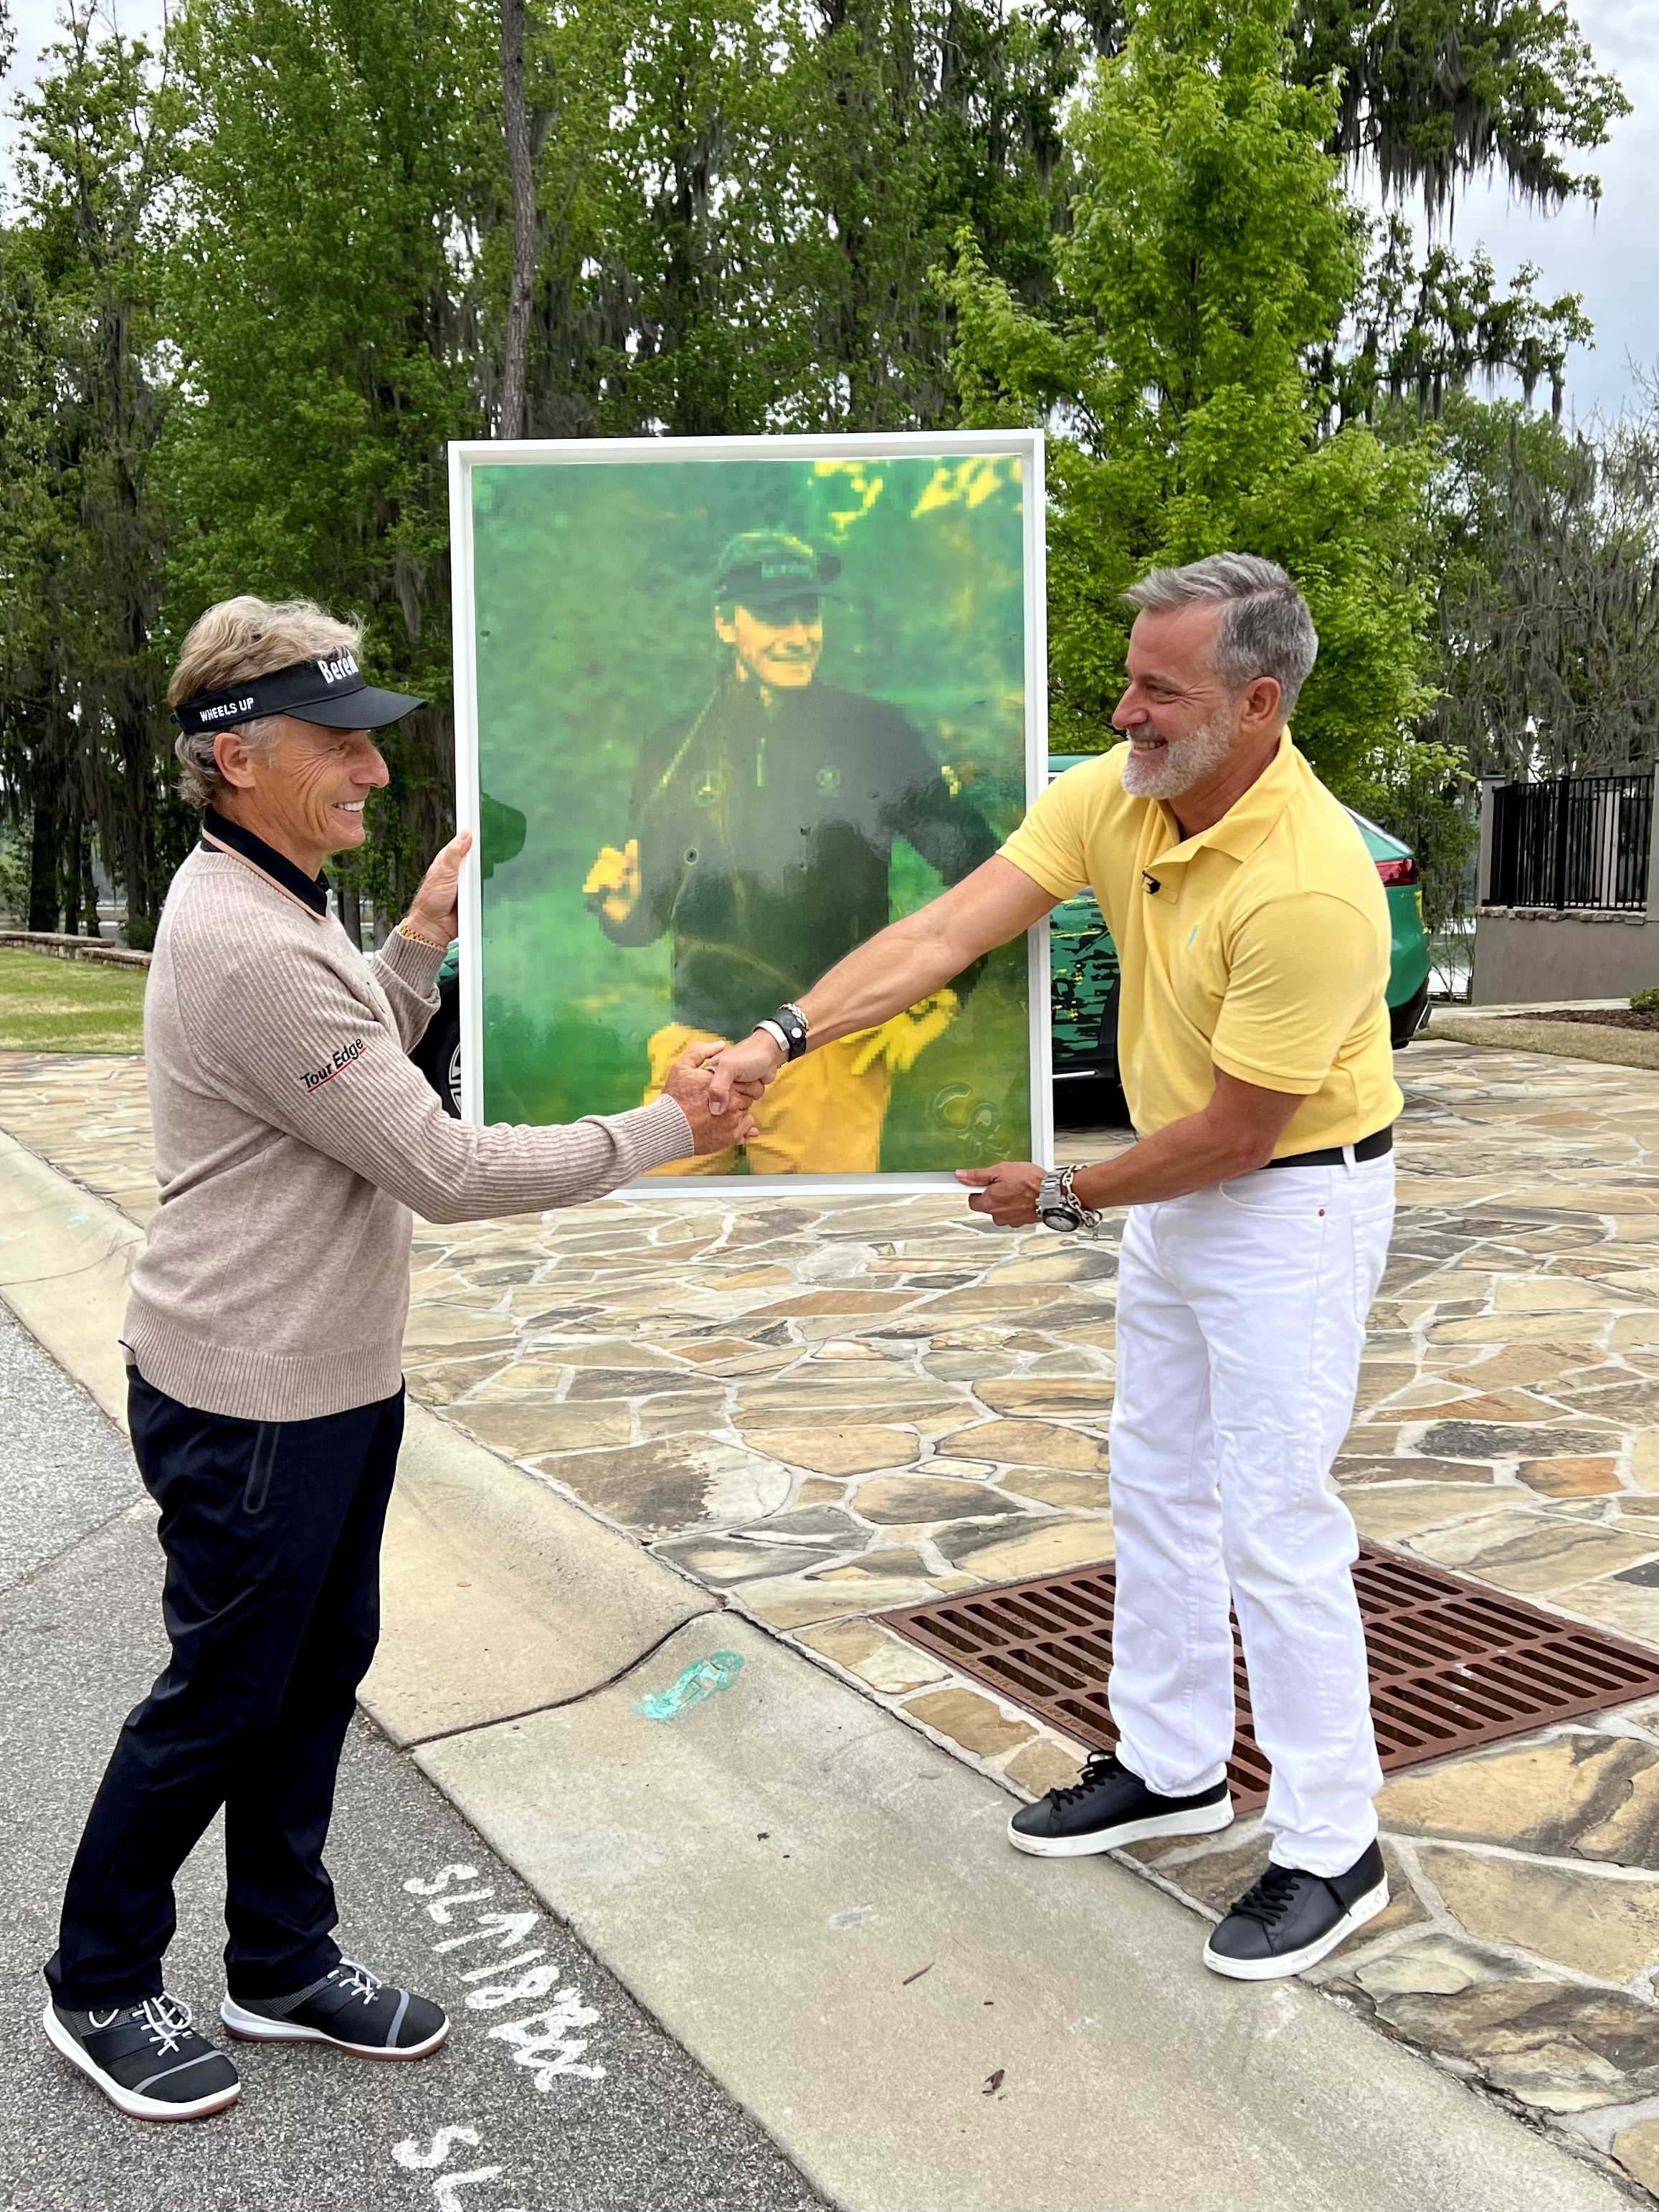 Masters 2023: Bernhard Langer's 40th appearance outlasts European friends